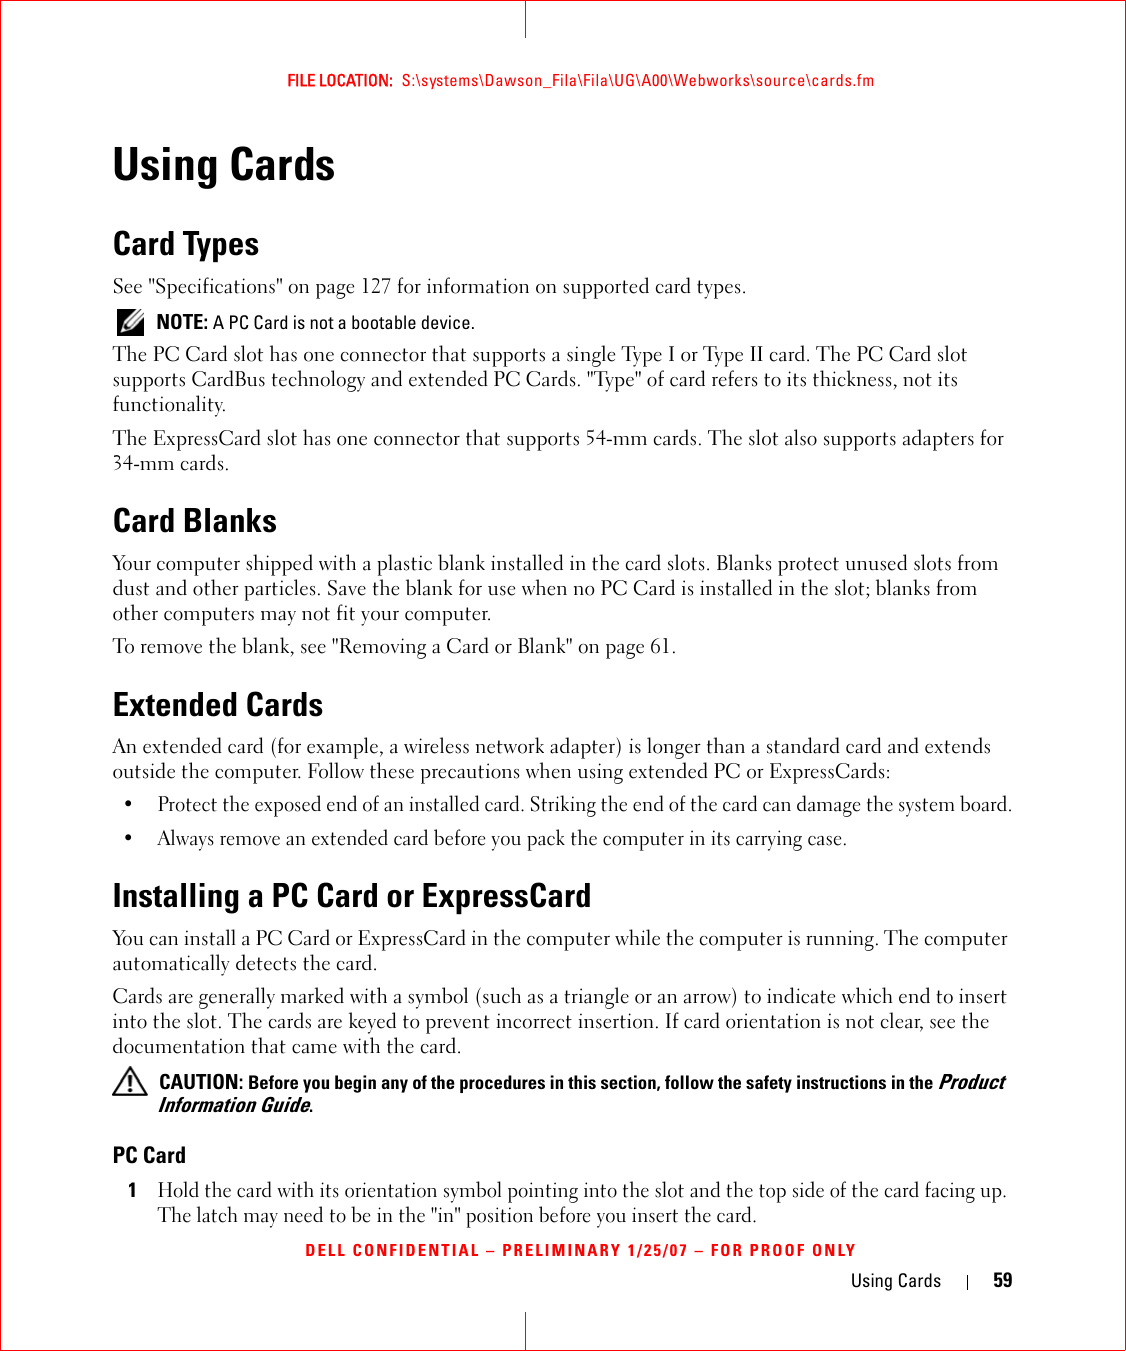 Using Cards 59FILE LOCATION:  S:\systems\Dawson_Fila\Fila\UG\A00\Webworks\source\cards.fmDELL CONFIDENTIAL – PRELIMINARY 1/25/07 – FOR PROOF ONLYUsing CardsCard TypesSee &quot;Specifications&quot; on page 127 for information on supported card types. NOTE: A PC Card is not a bootable device.The PC Card slot has one connector that supports a single Type I or Type II card. The PC Card slot supports CardBus technology and extended PC Cards. &quot;Type&quot; of card refers to its thickness, not its functionality.The ExpressCard slot has one connector that supports 54-mm cards. The slot also supports adapters for 34-mm cards.Card BlanksYour computer shipped with a plastic blank installed in the card slots. Blanks protect unused slots from dust and other particles. Save the blank for use when no PC Card is installed in the slot; blanks from other computers may not fit your computer.To remove the blank, see &quot;Removing a Card or Blank&quot; on page 61.Extended CardsAn extended card (for example, a wireless network adapter) is longer than a standard card and extends outside the computer. Follow these precautions when using extended PC or ExpressCards:• Protect the exposed end of an installed card. Striking the end of the card can damage the system board.• Always remove an extended card before you pack the computer in its carrying case.Installing a PC Card or ExpressCardYou can install a PC Card or ExpressCard in the computer while the computer is running. The computer automatically detects the card.Cards are generally marked with a symbol (such as a triangle or an arrow) to indicate which end to insert into the slot. The cards are keyed to prevent incorrect insertion. If card orientation is not clear, see the documentation that came with the card.  CAUTION: Before you begin any of the procedures in this section, follow the safety instructions in the Product Information Guide.PC Card1Hold the card with its orientation symbol pointing into the slot and the top side of the card facing up. The latch may need to be in the &quot;in&quot; position before you insert the card.